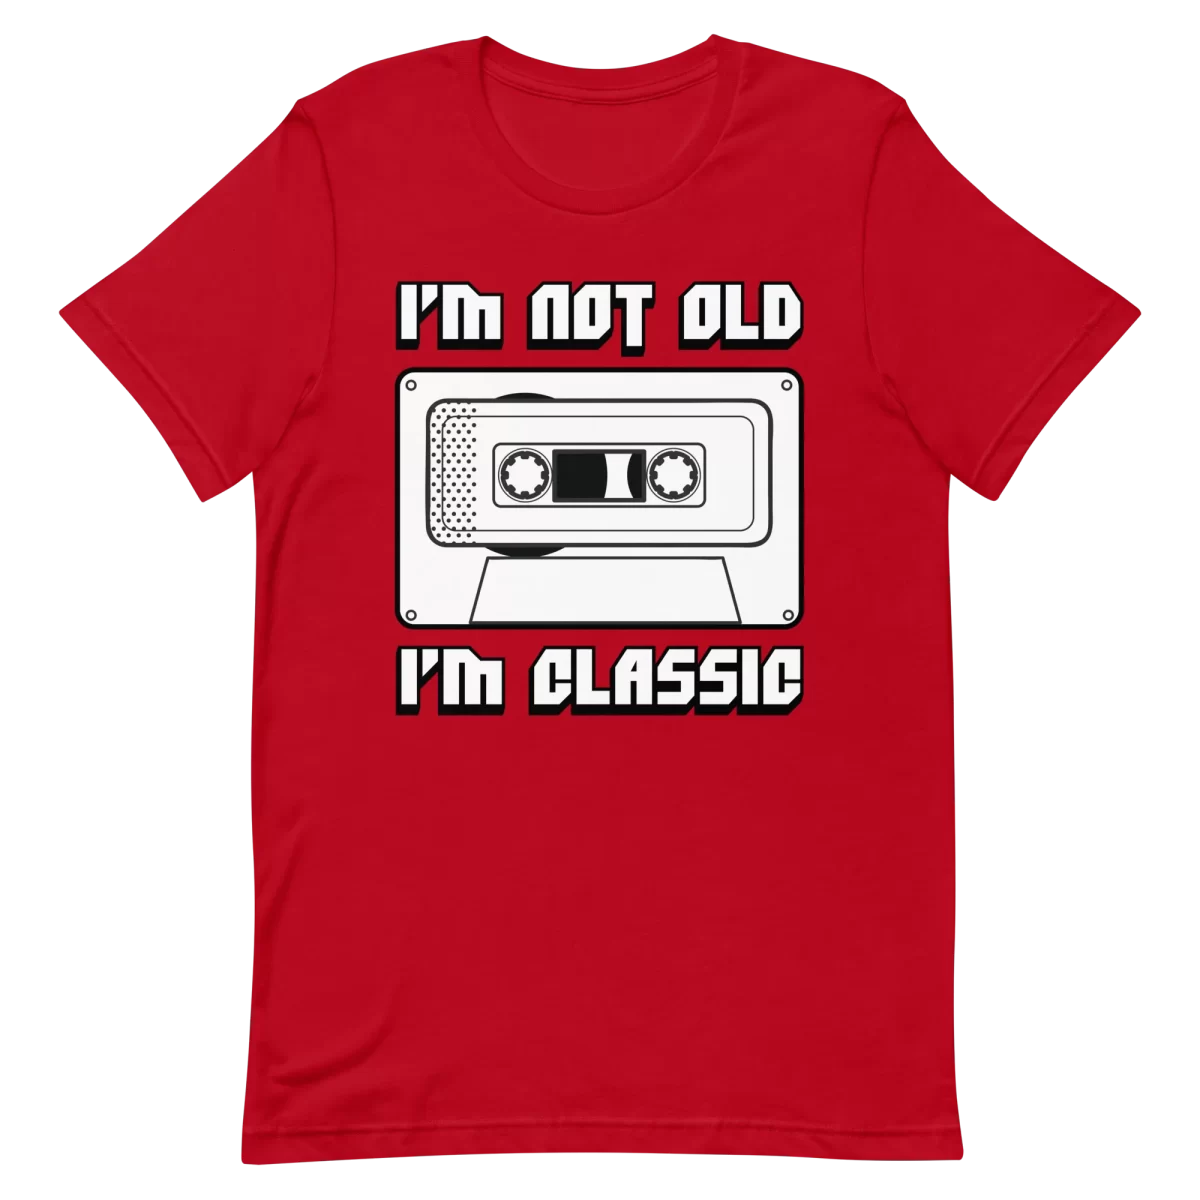 Unisex T-Shirt - I'm Not Old I'm Classic - Red